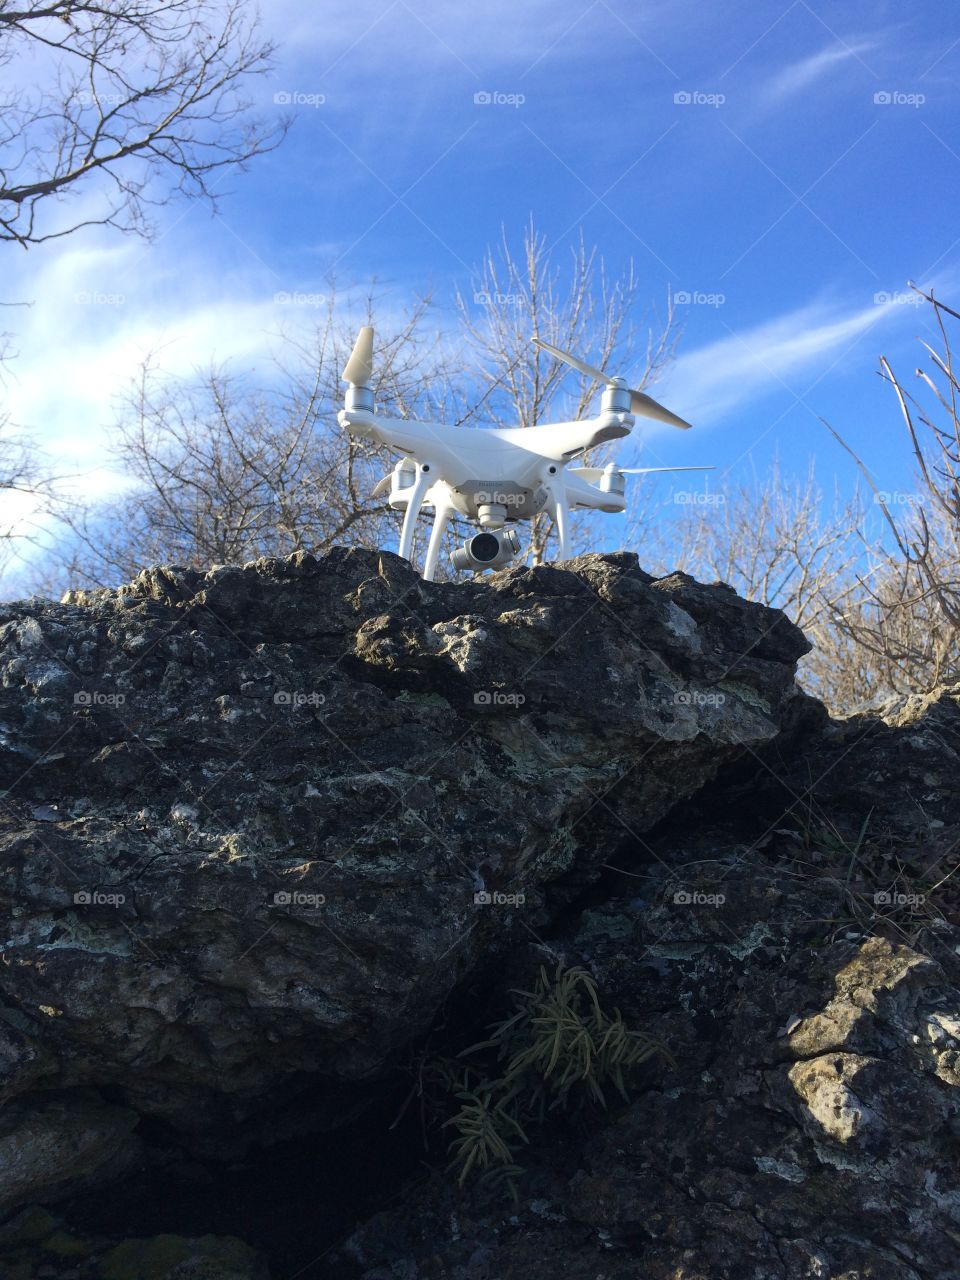 Drone on the rocks 